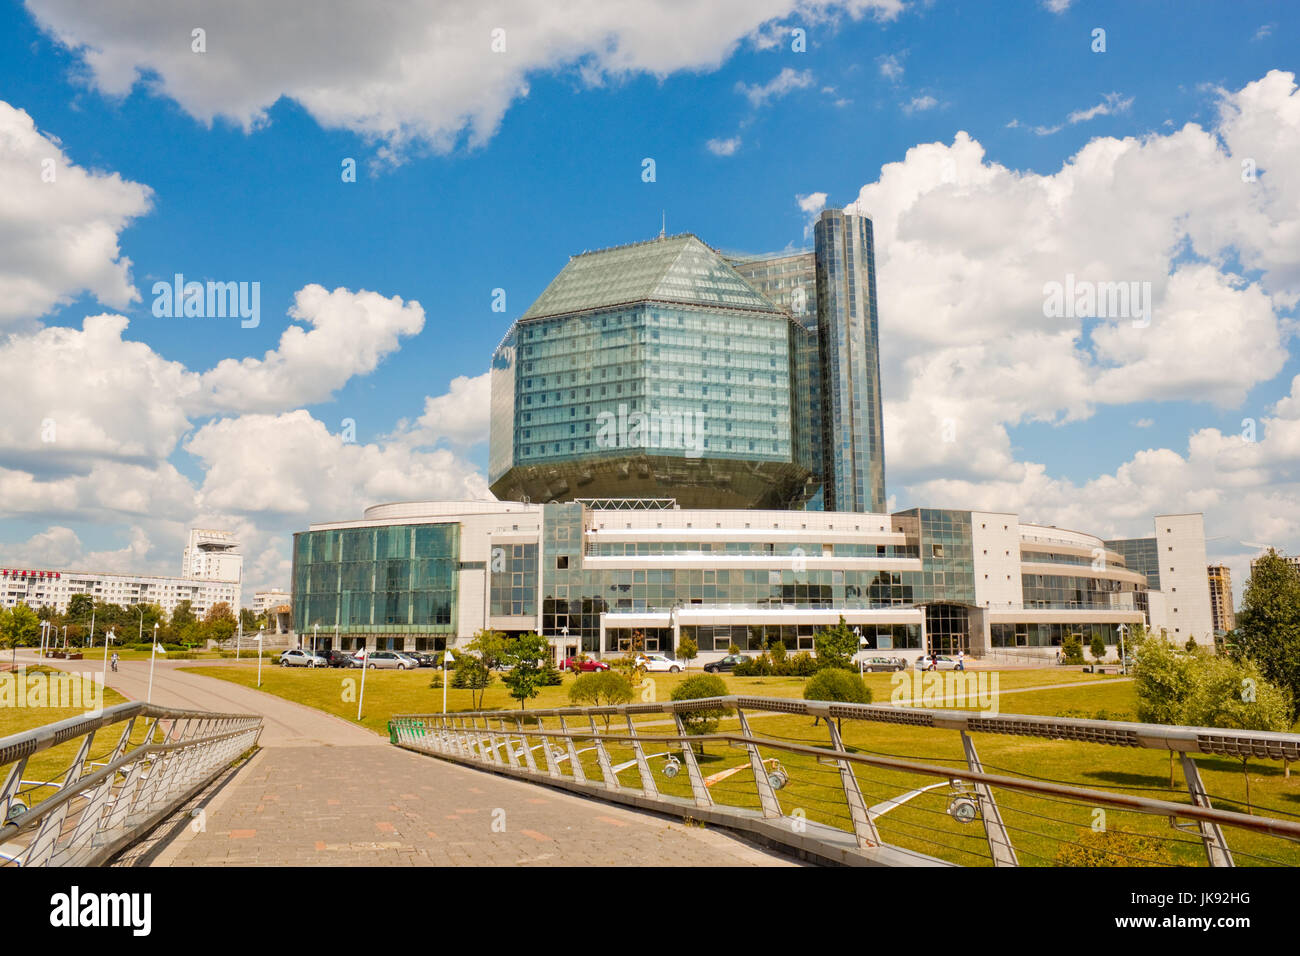 Minsk, Belarus - July 22, 2014: A view of modern building of National library of Belarus. Stock Photo